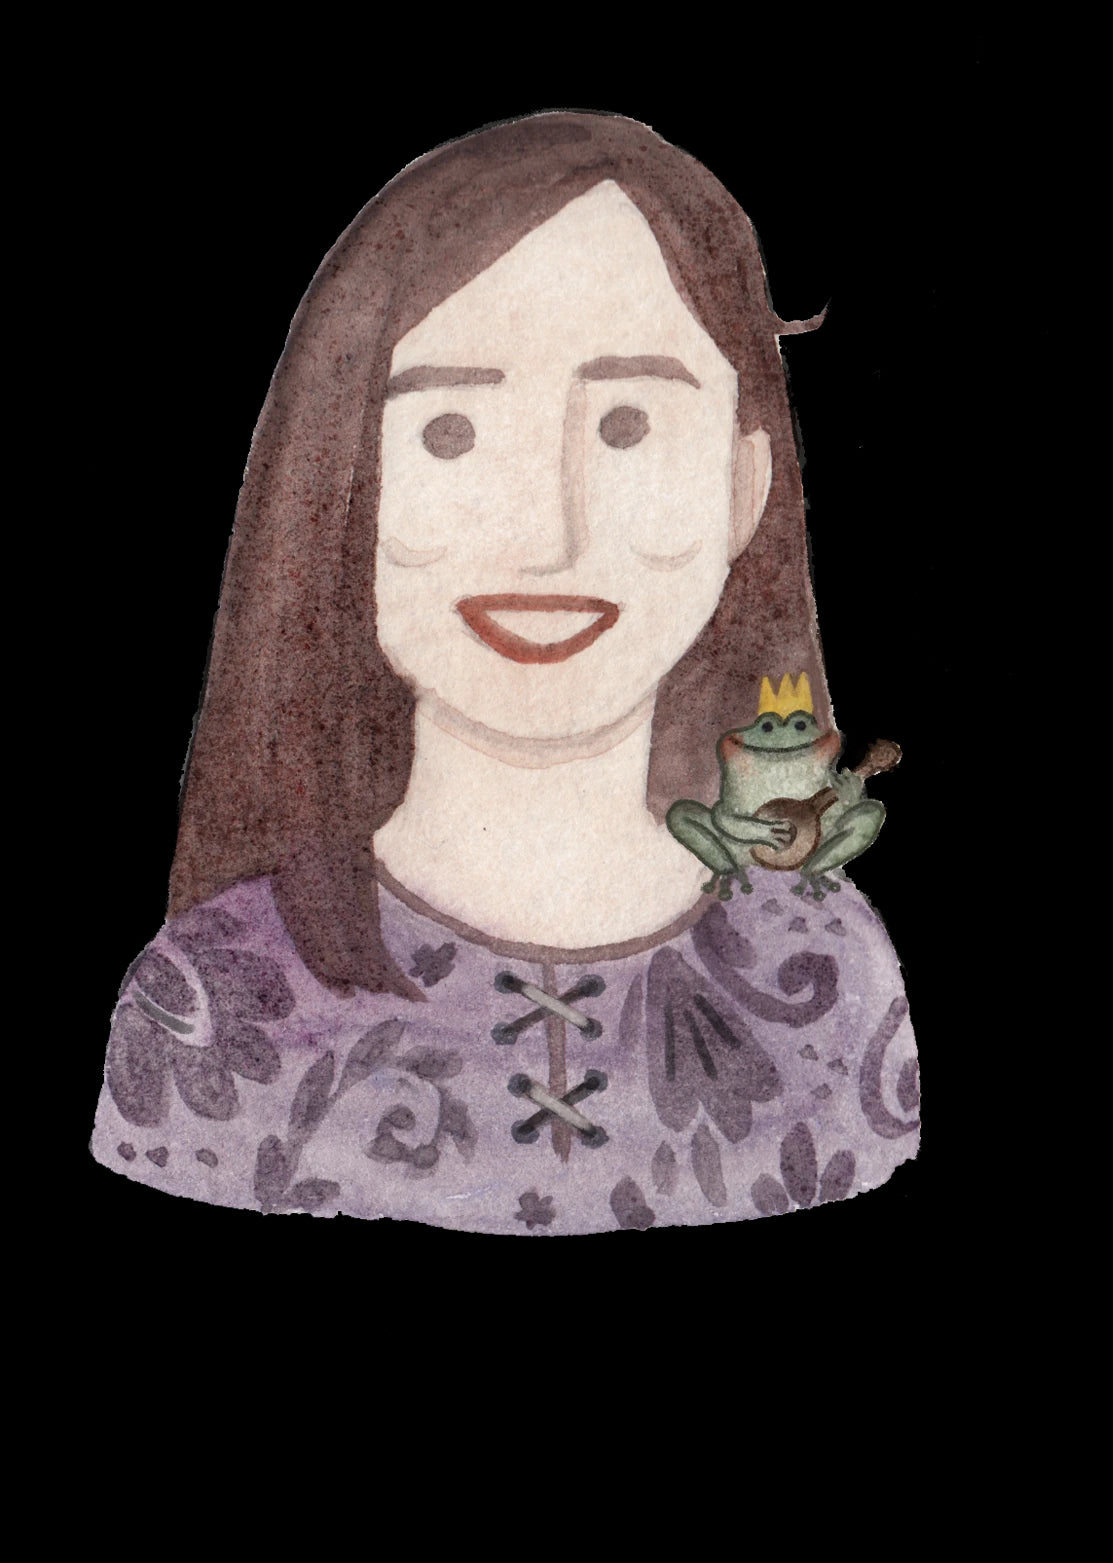 Image of Claudia Piras from Fairy Tales Retold